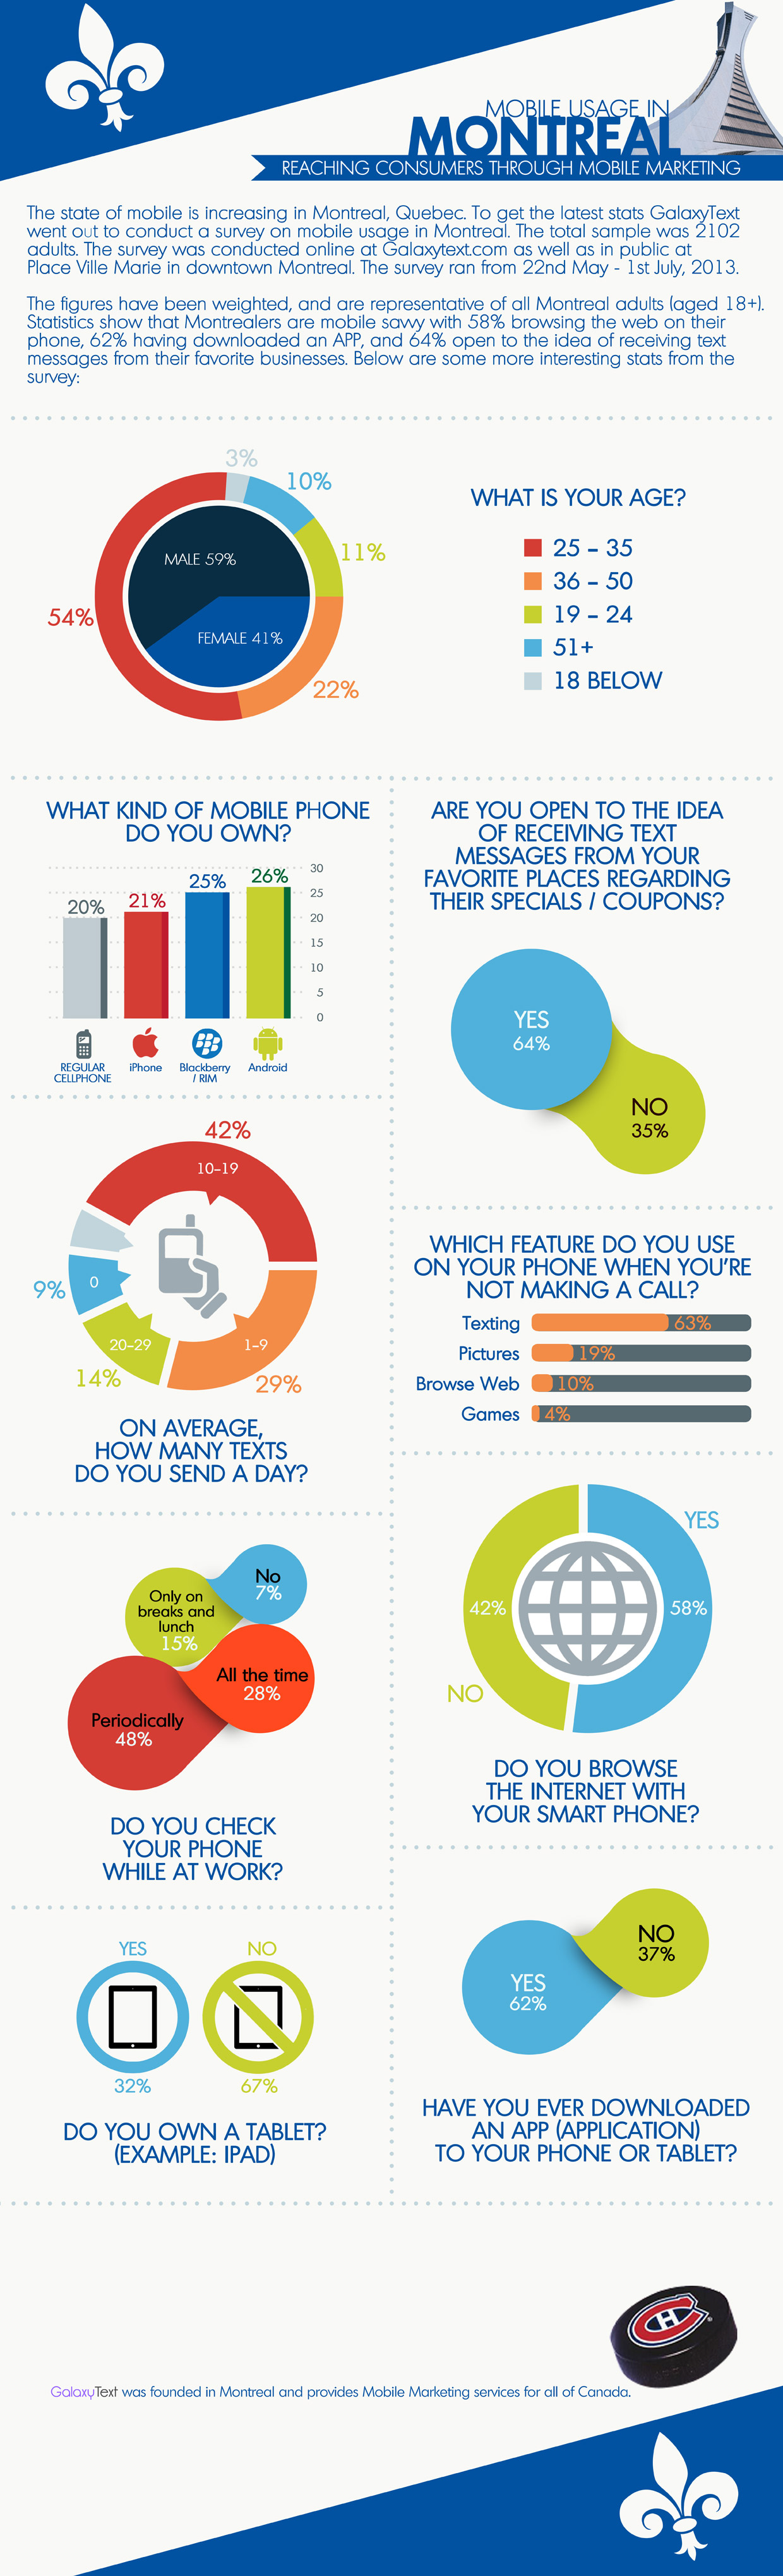 Mobile Marketing Infographic Statistics - Mobile Usage in Montreal Survey